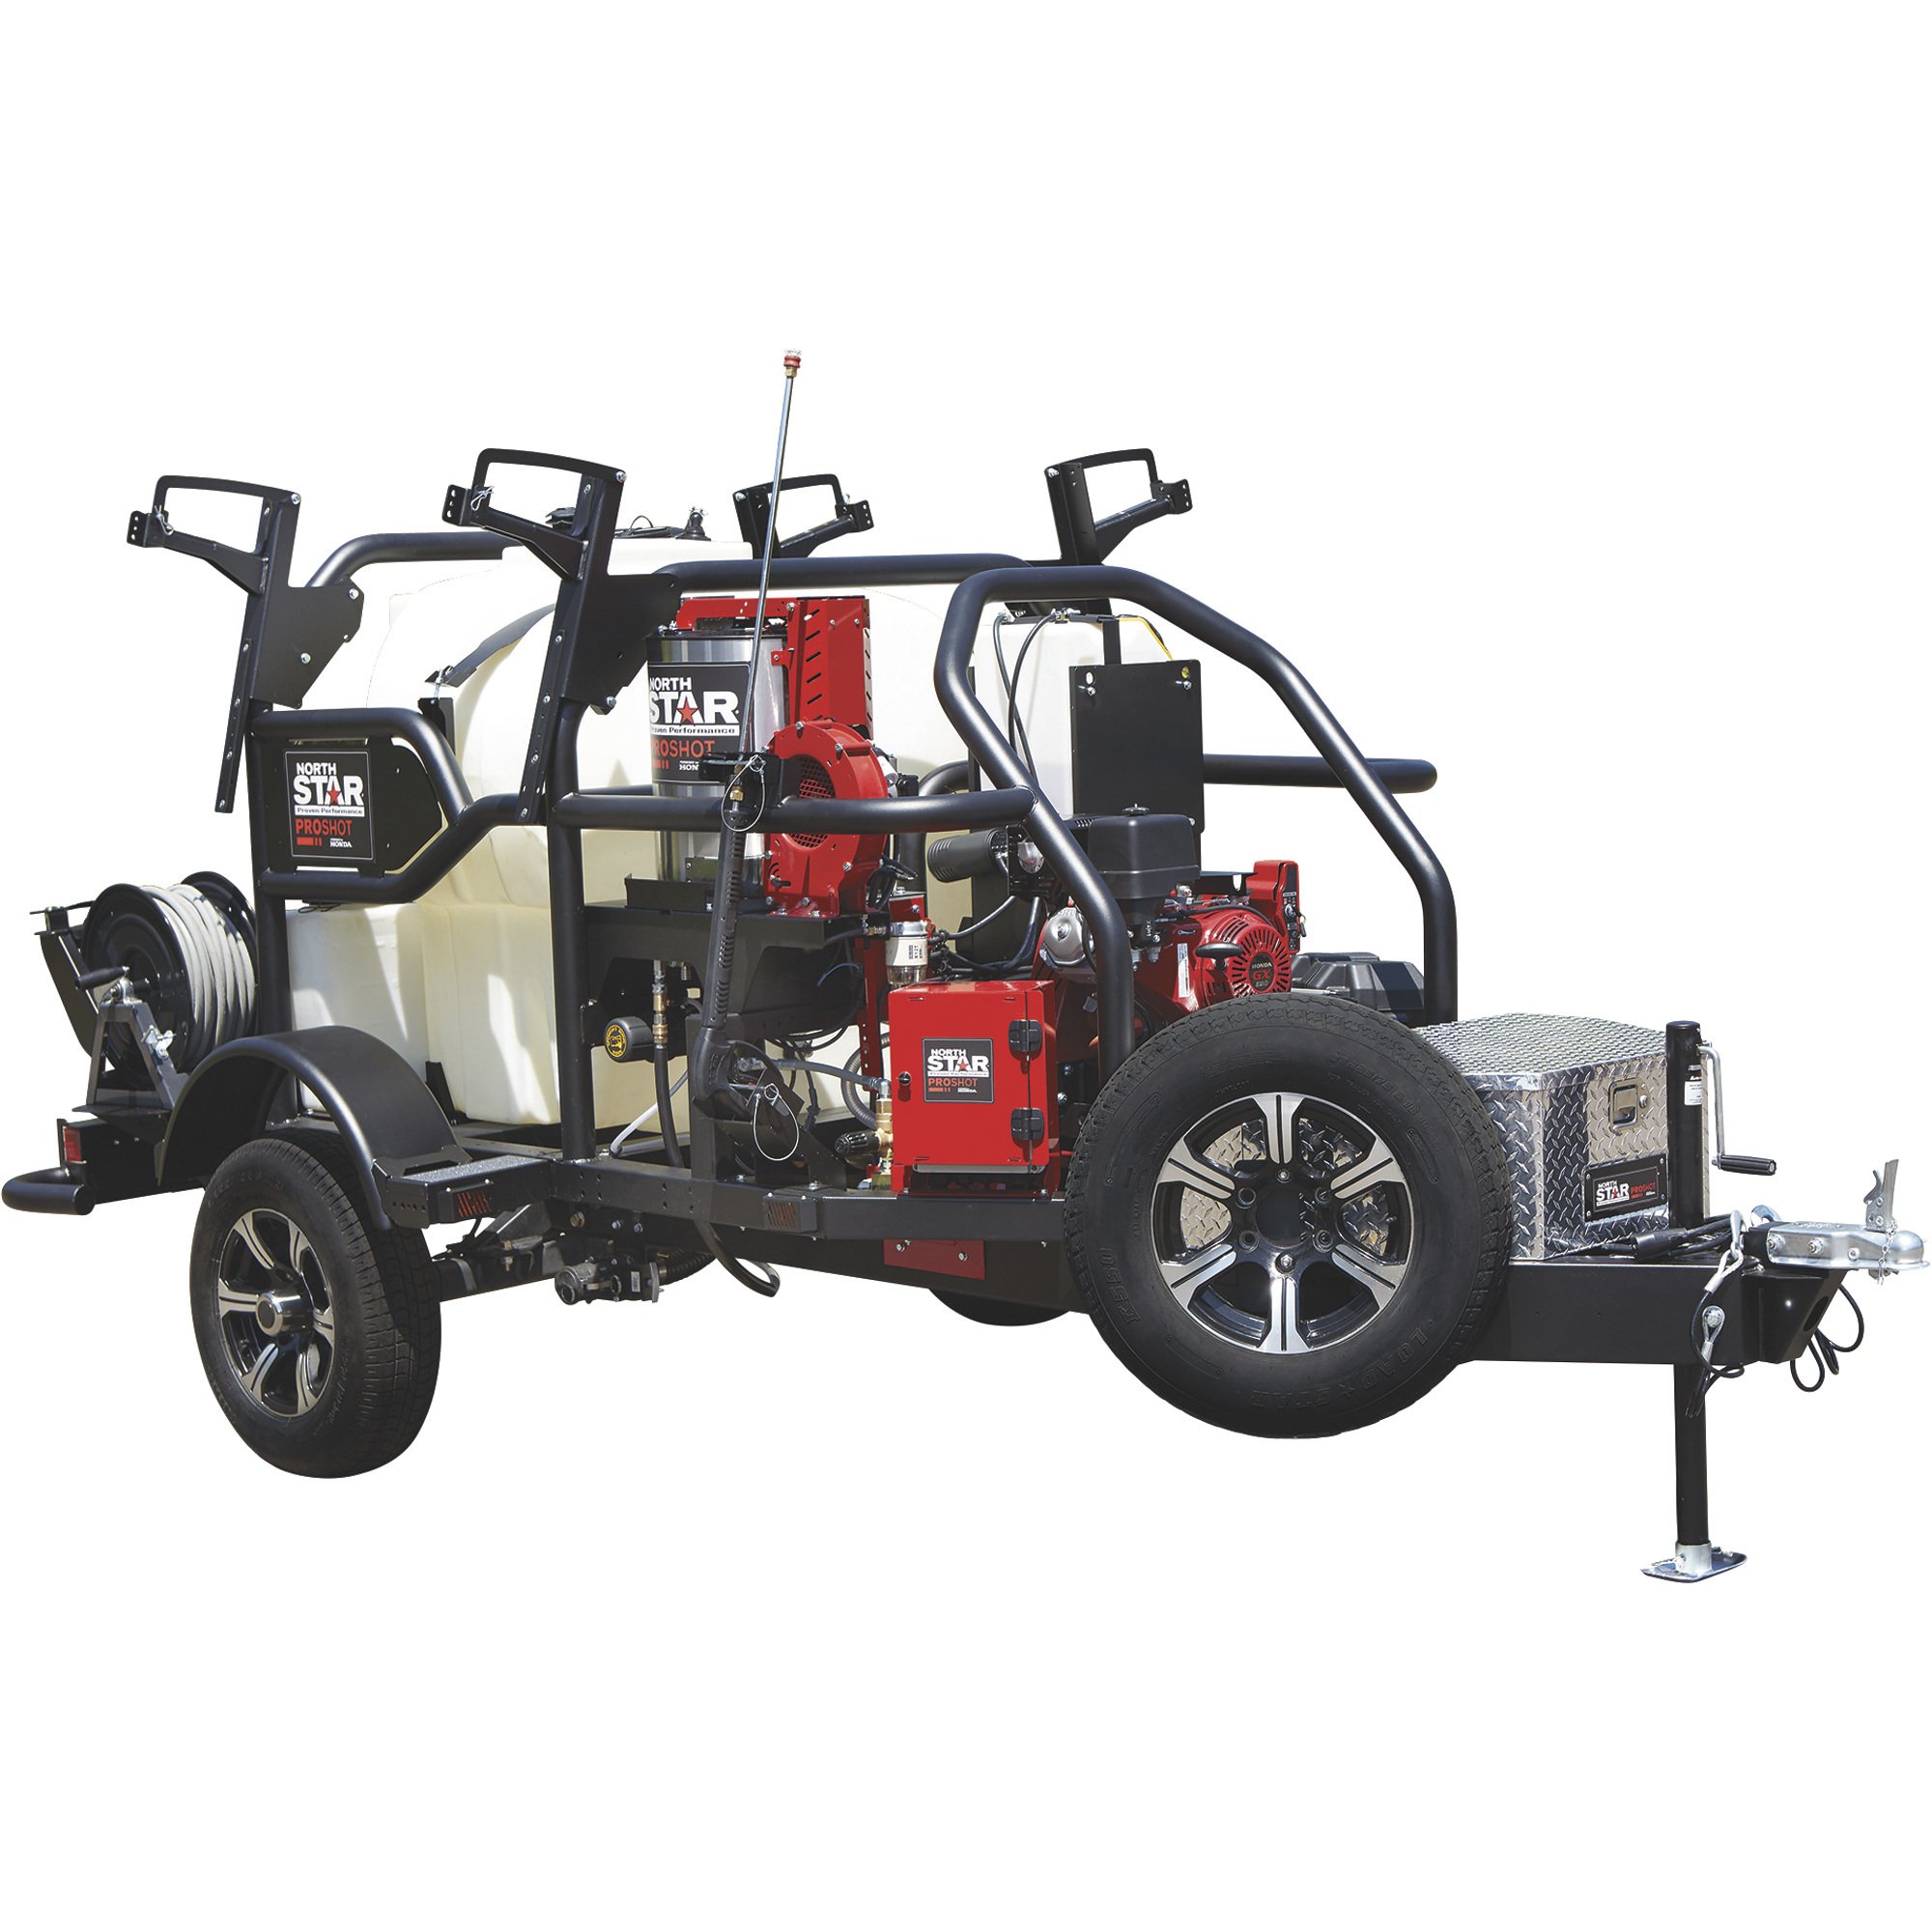  North Star Hot Water & Wet Steam Pressure Washer with Power  Nozzles, Lance, Washing Gun, and Hose - Gas Powered, 3000 PSI, 4 GPM,  Electric Start Honda Engine : Patio, Lawn & Garden